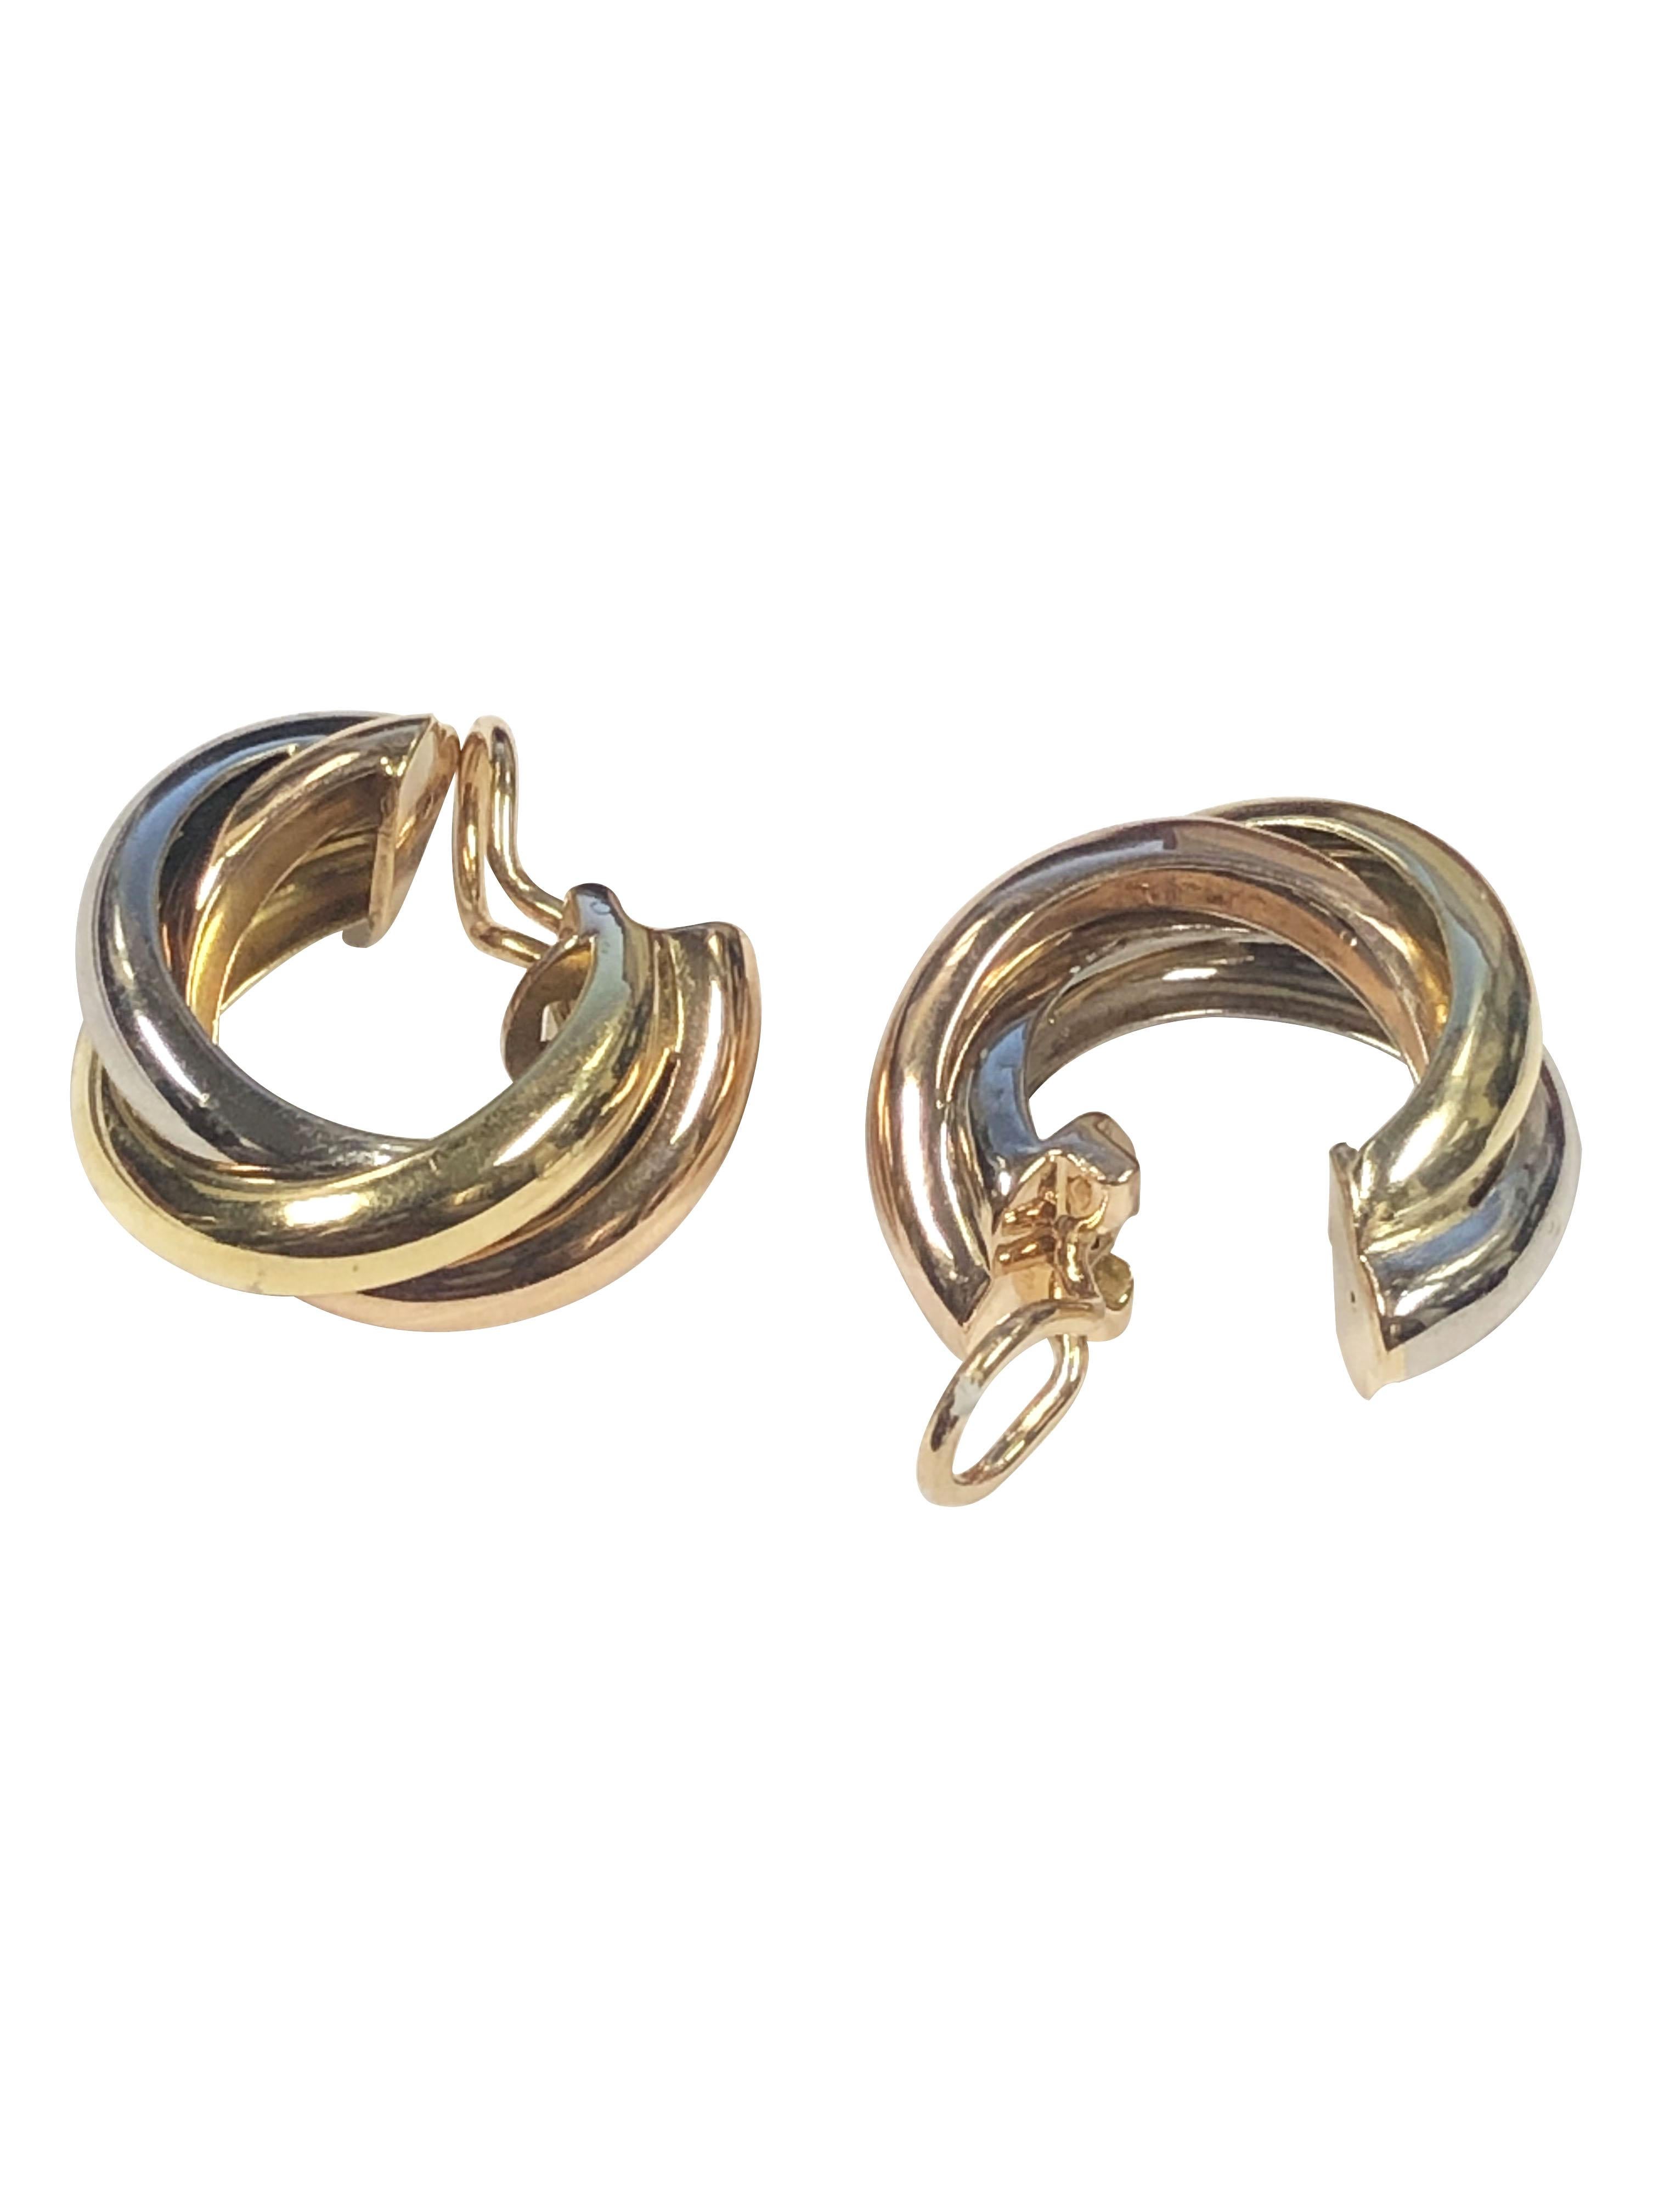 Circa 2000 Cartier Trinity collection 18K Yellow, Rose and White Gold Hoop Earrings, measuring 7/8 inch in length 7/8 inch in diameter and 3/8 inch wide. having Omega backs to which a post can be easily added if desired. Comes in the original